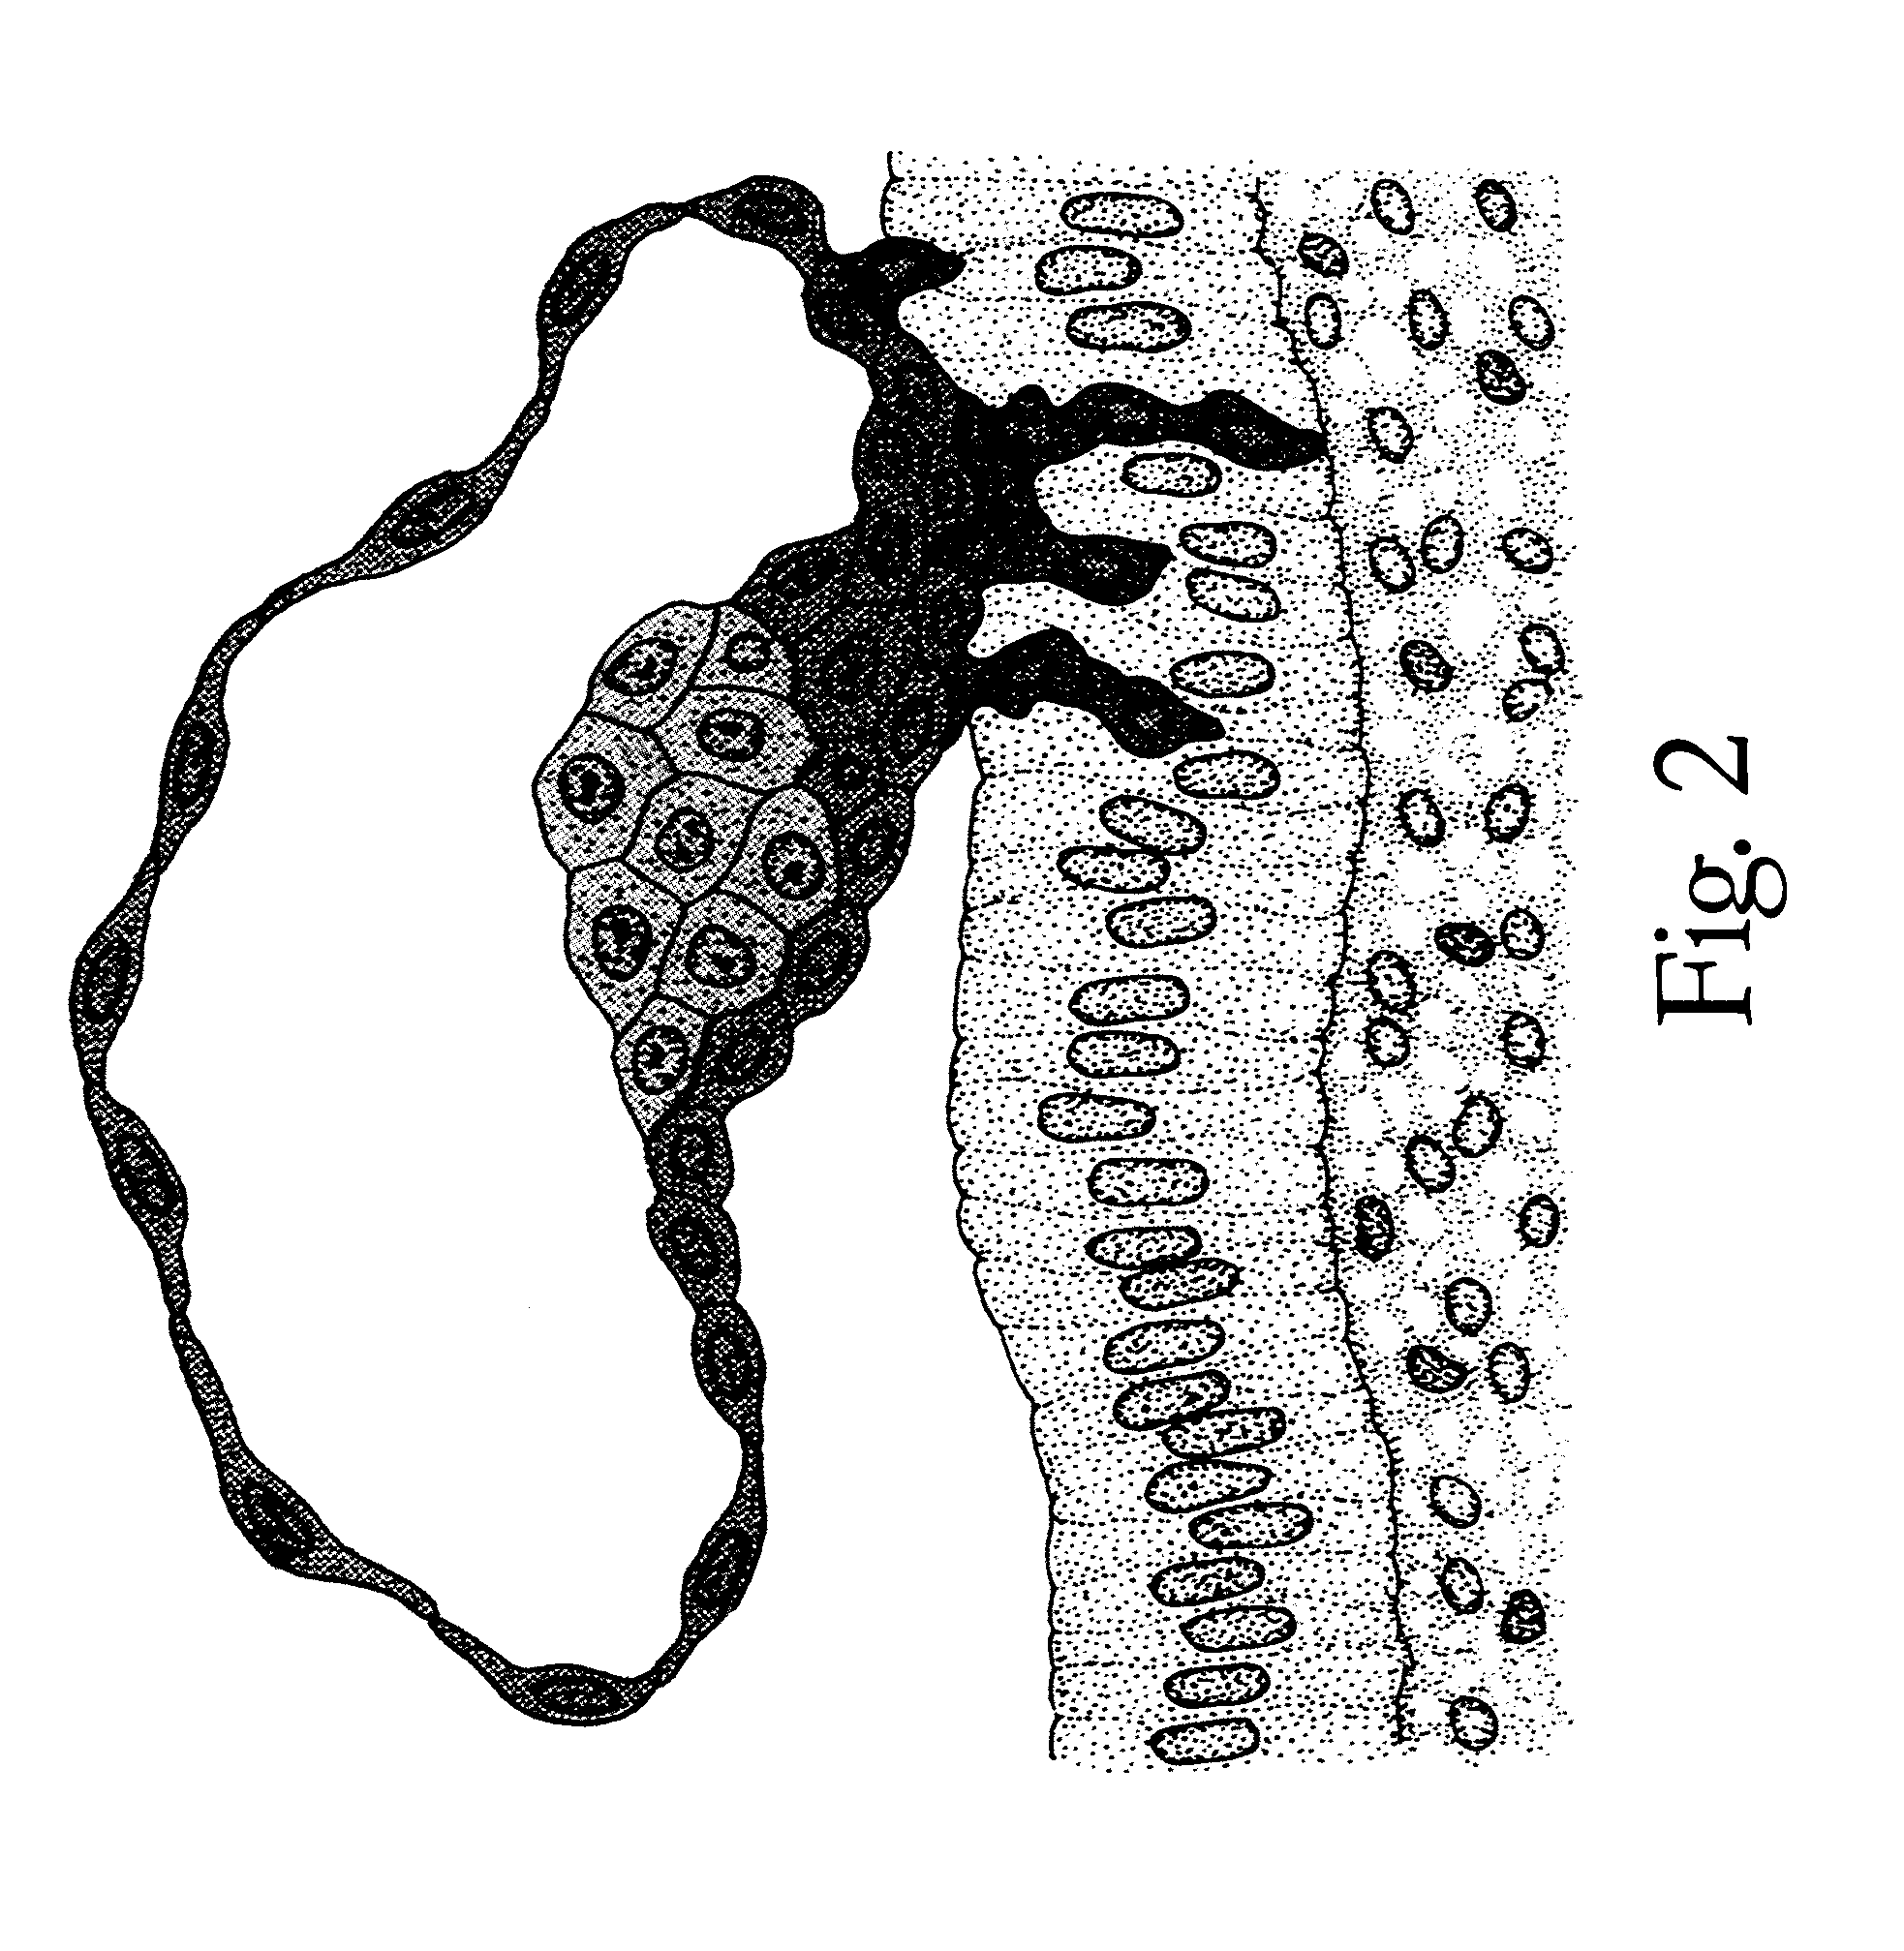 Method of making and using a library of biological material